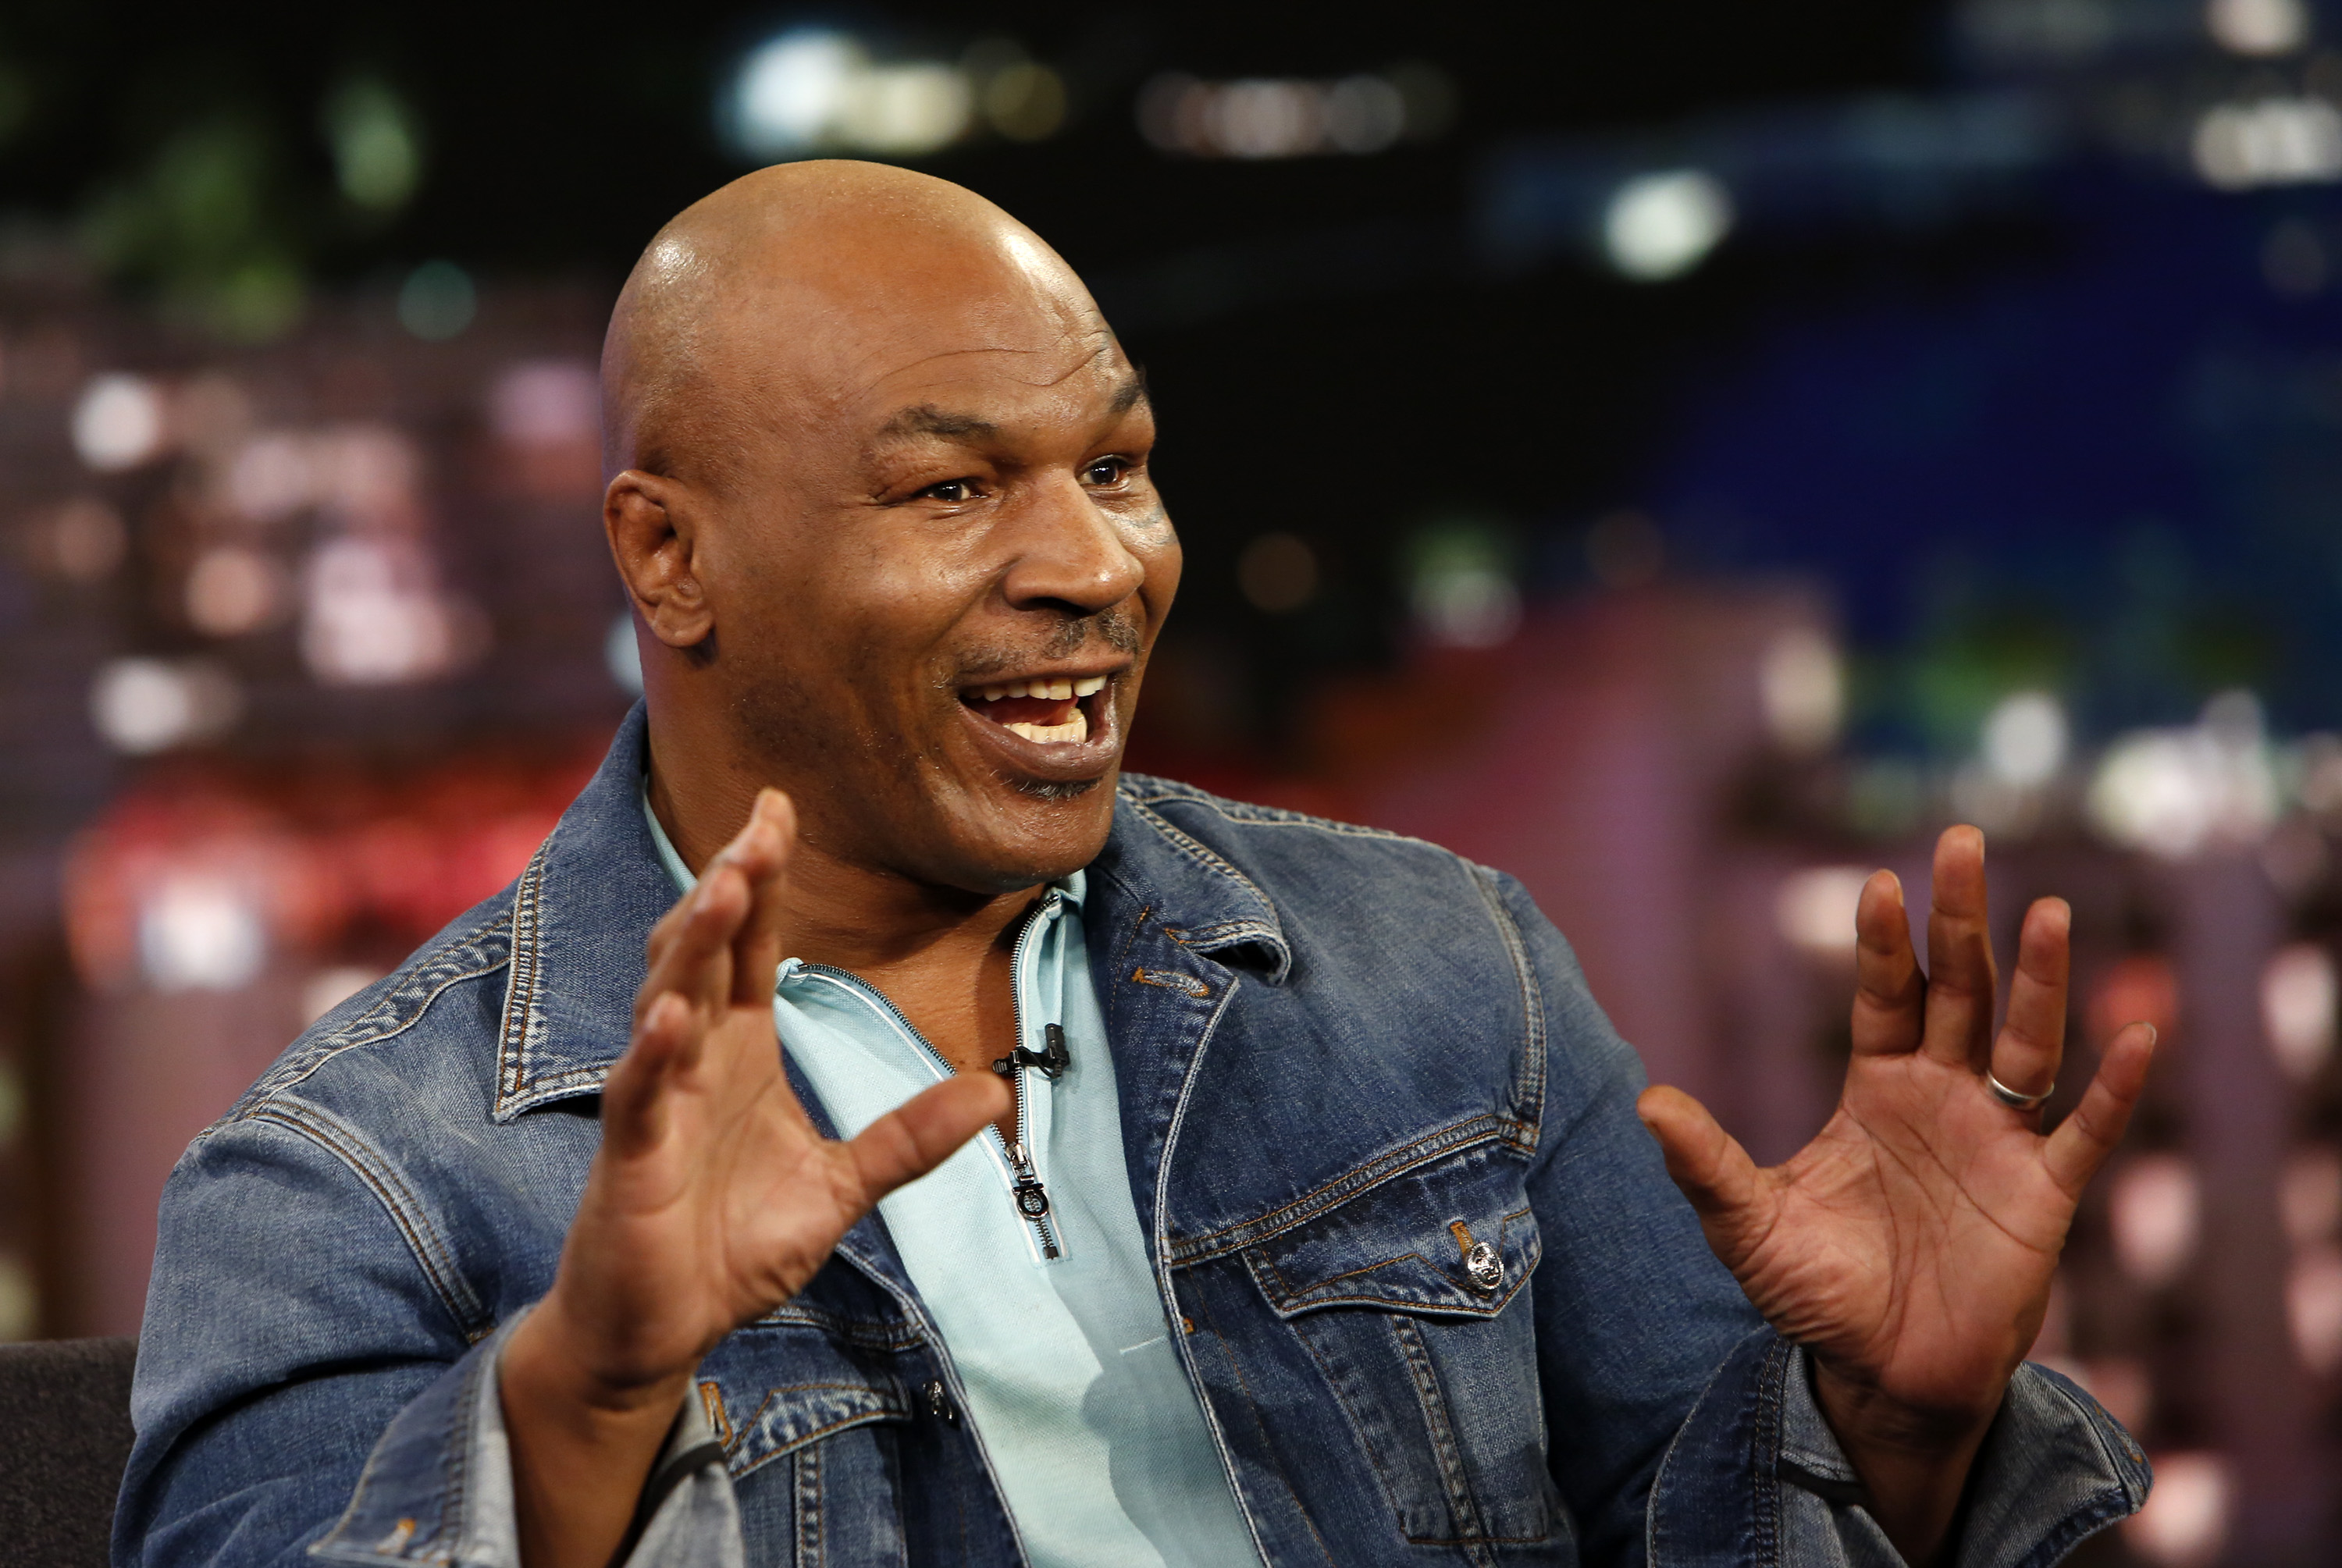 Mike Tyson reveals the NFL Hall of Famer who inspired his boxing comeback.